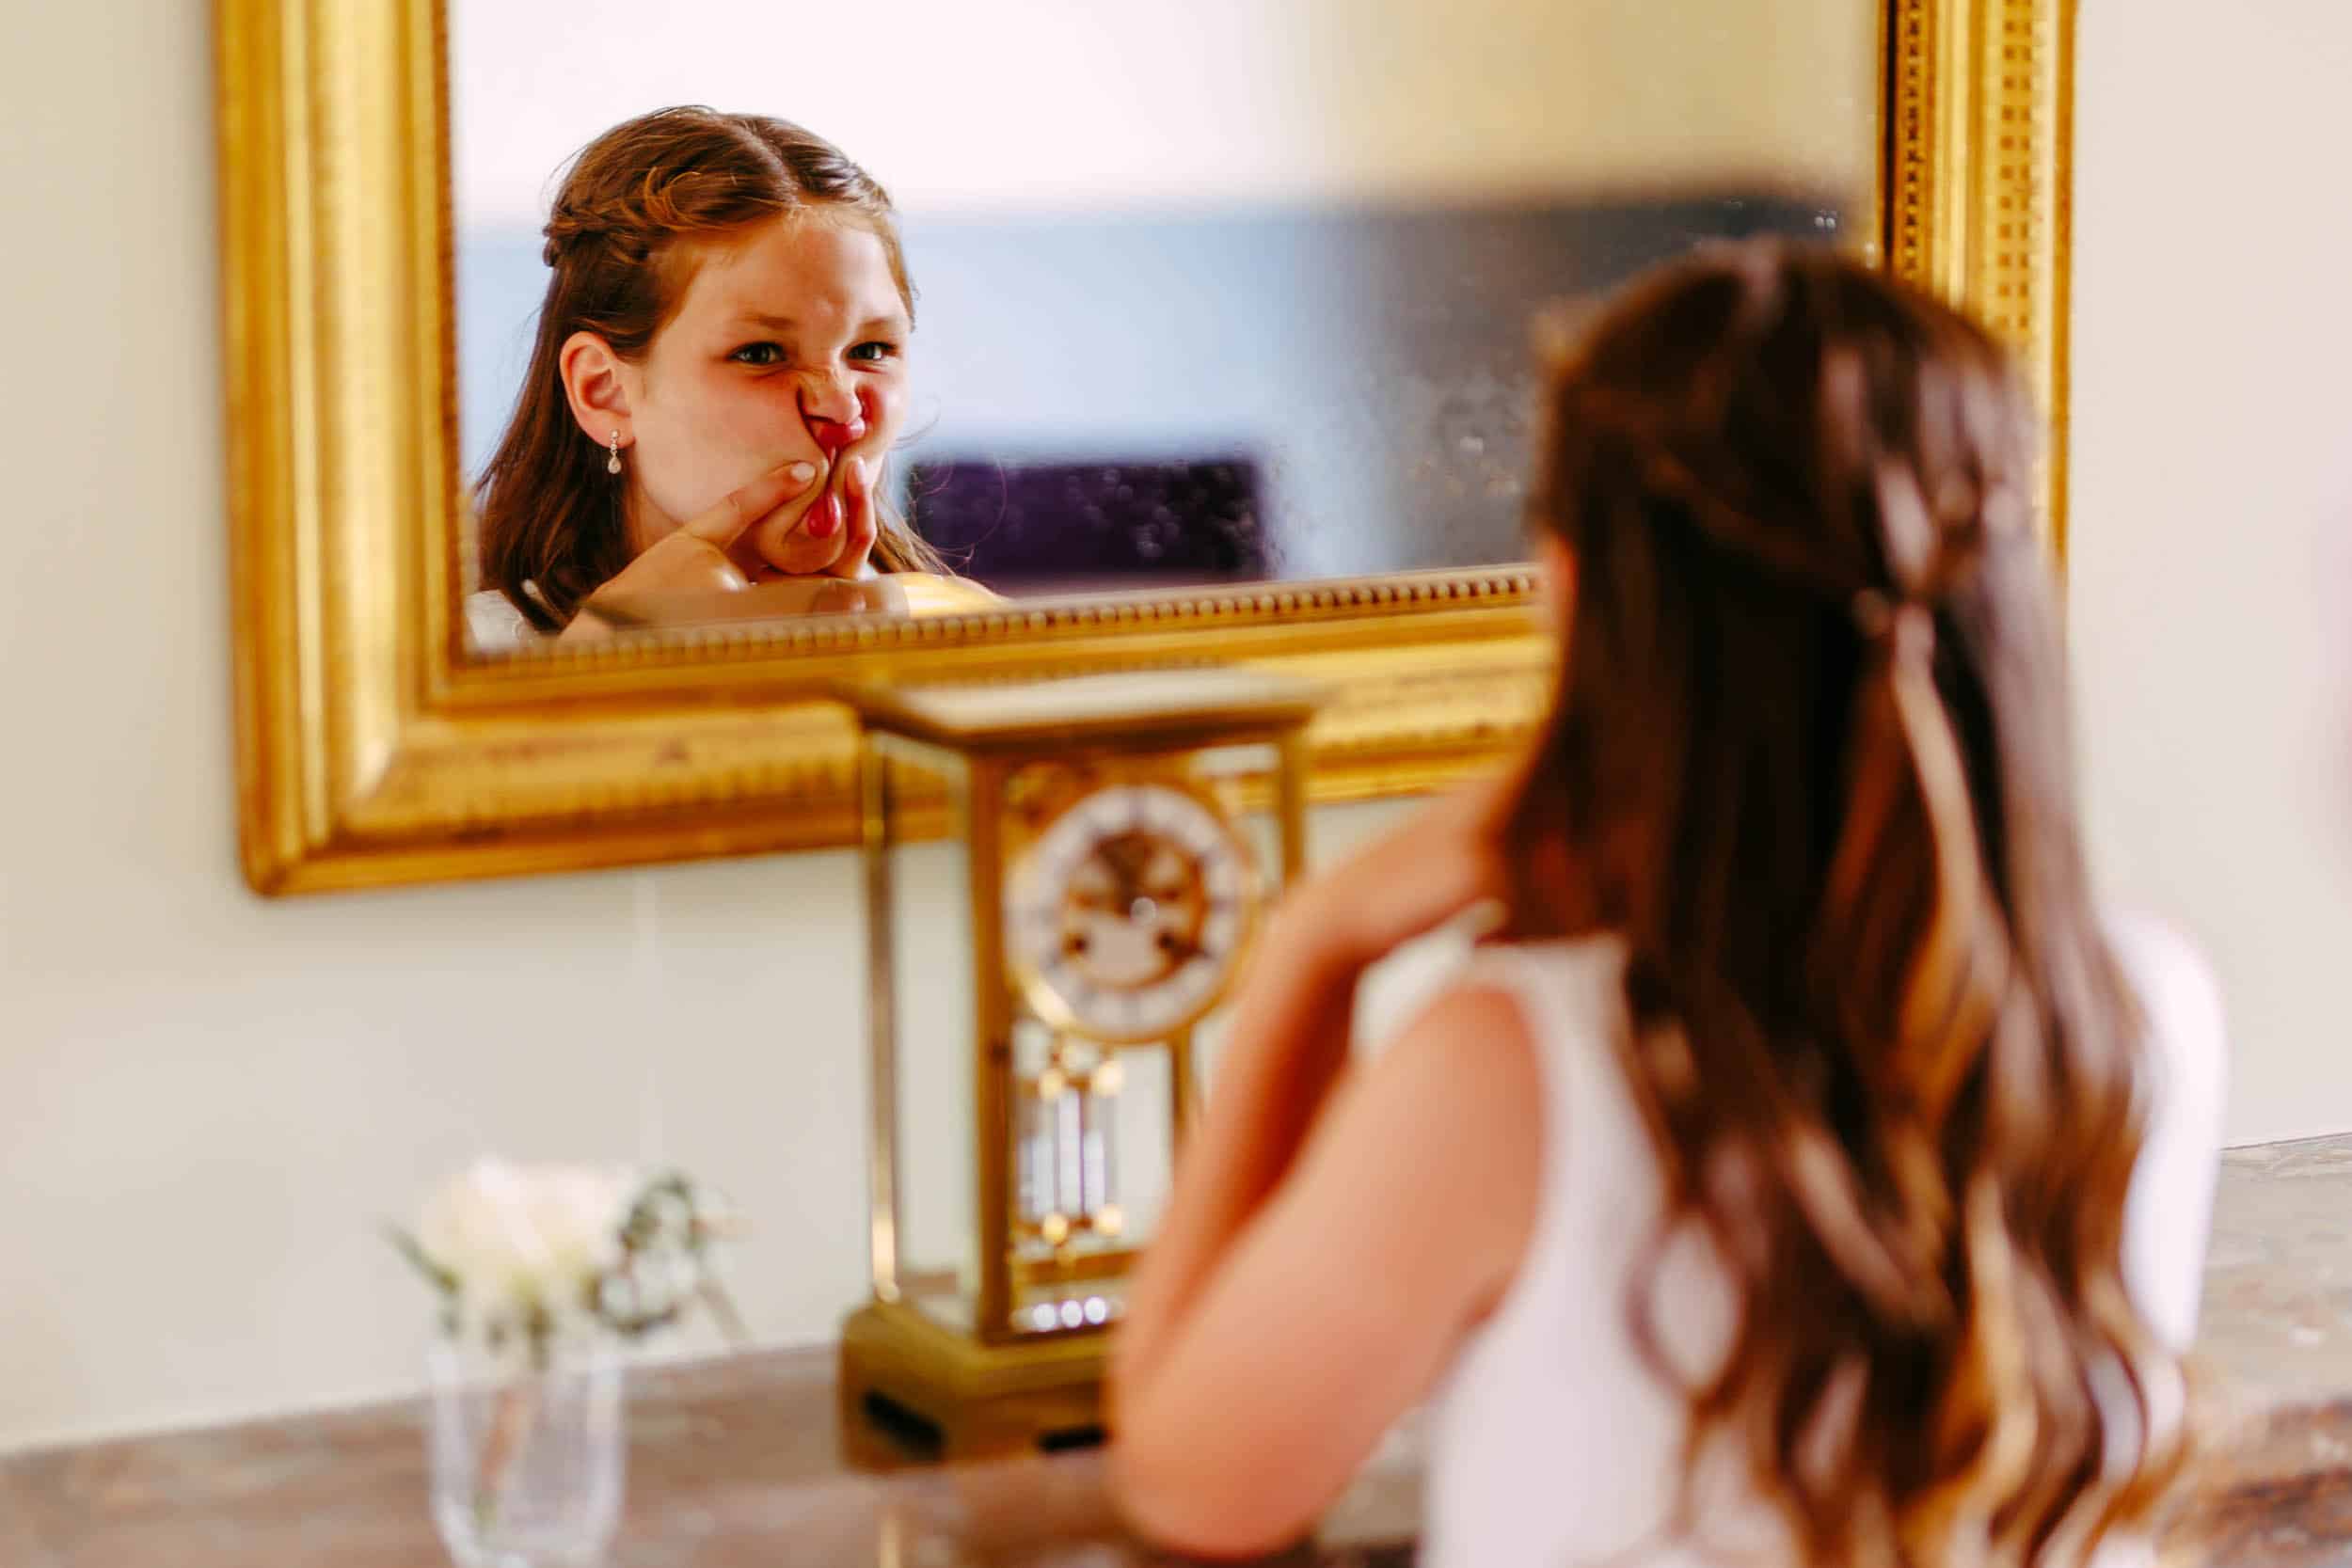 A girl looks at herself in a mirror.